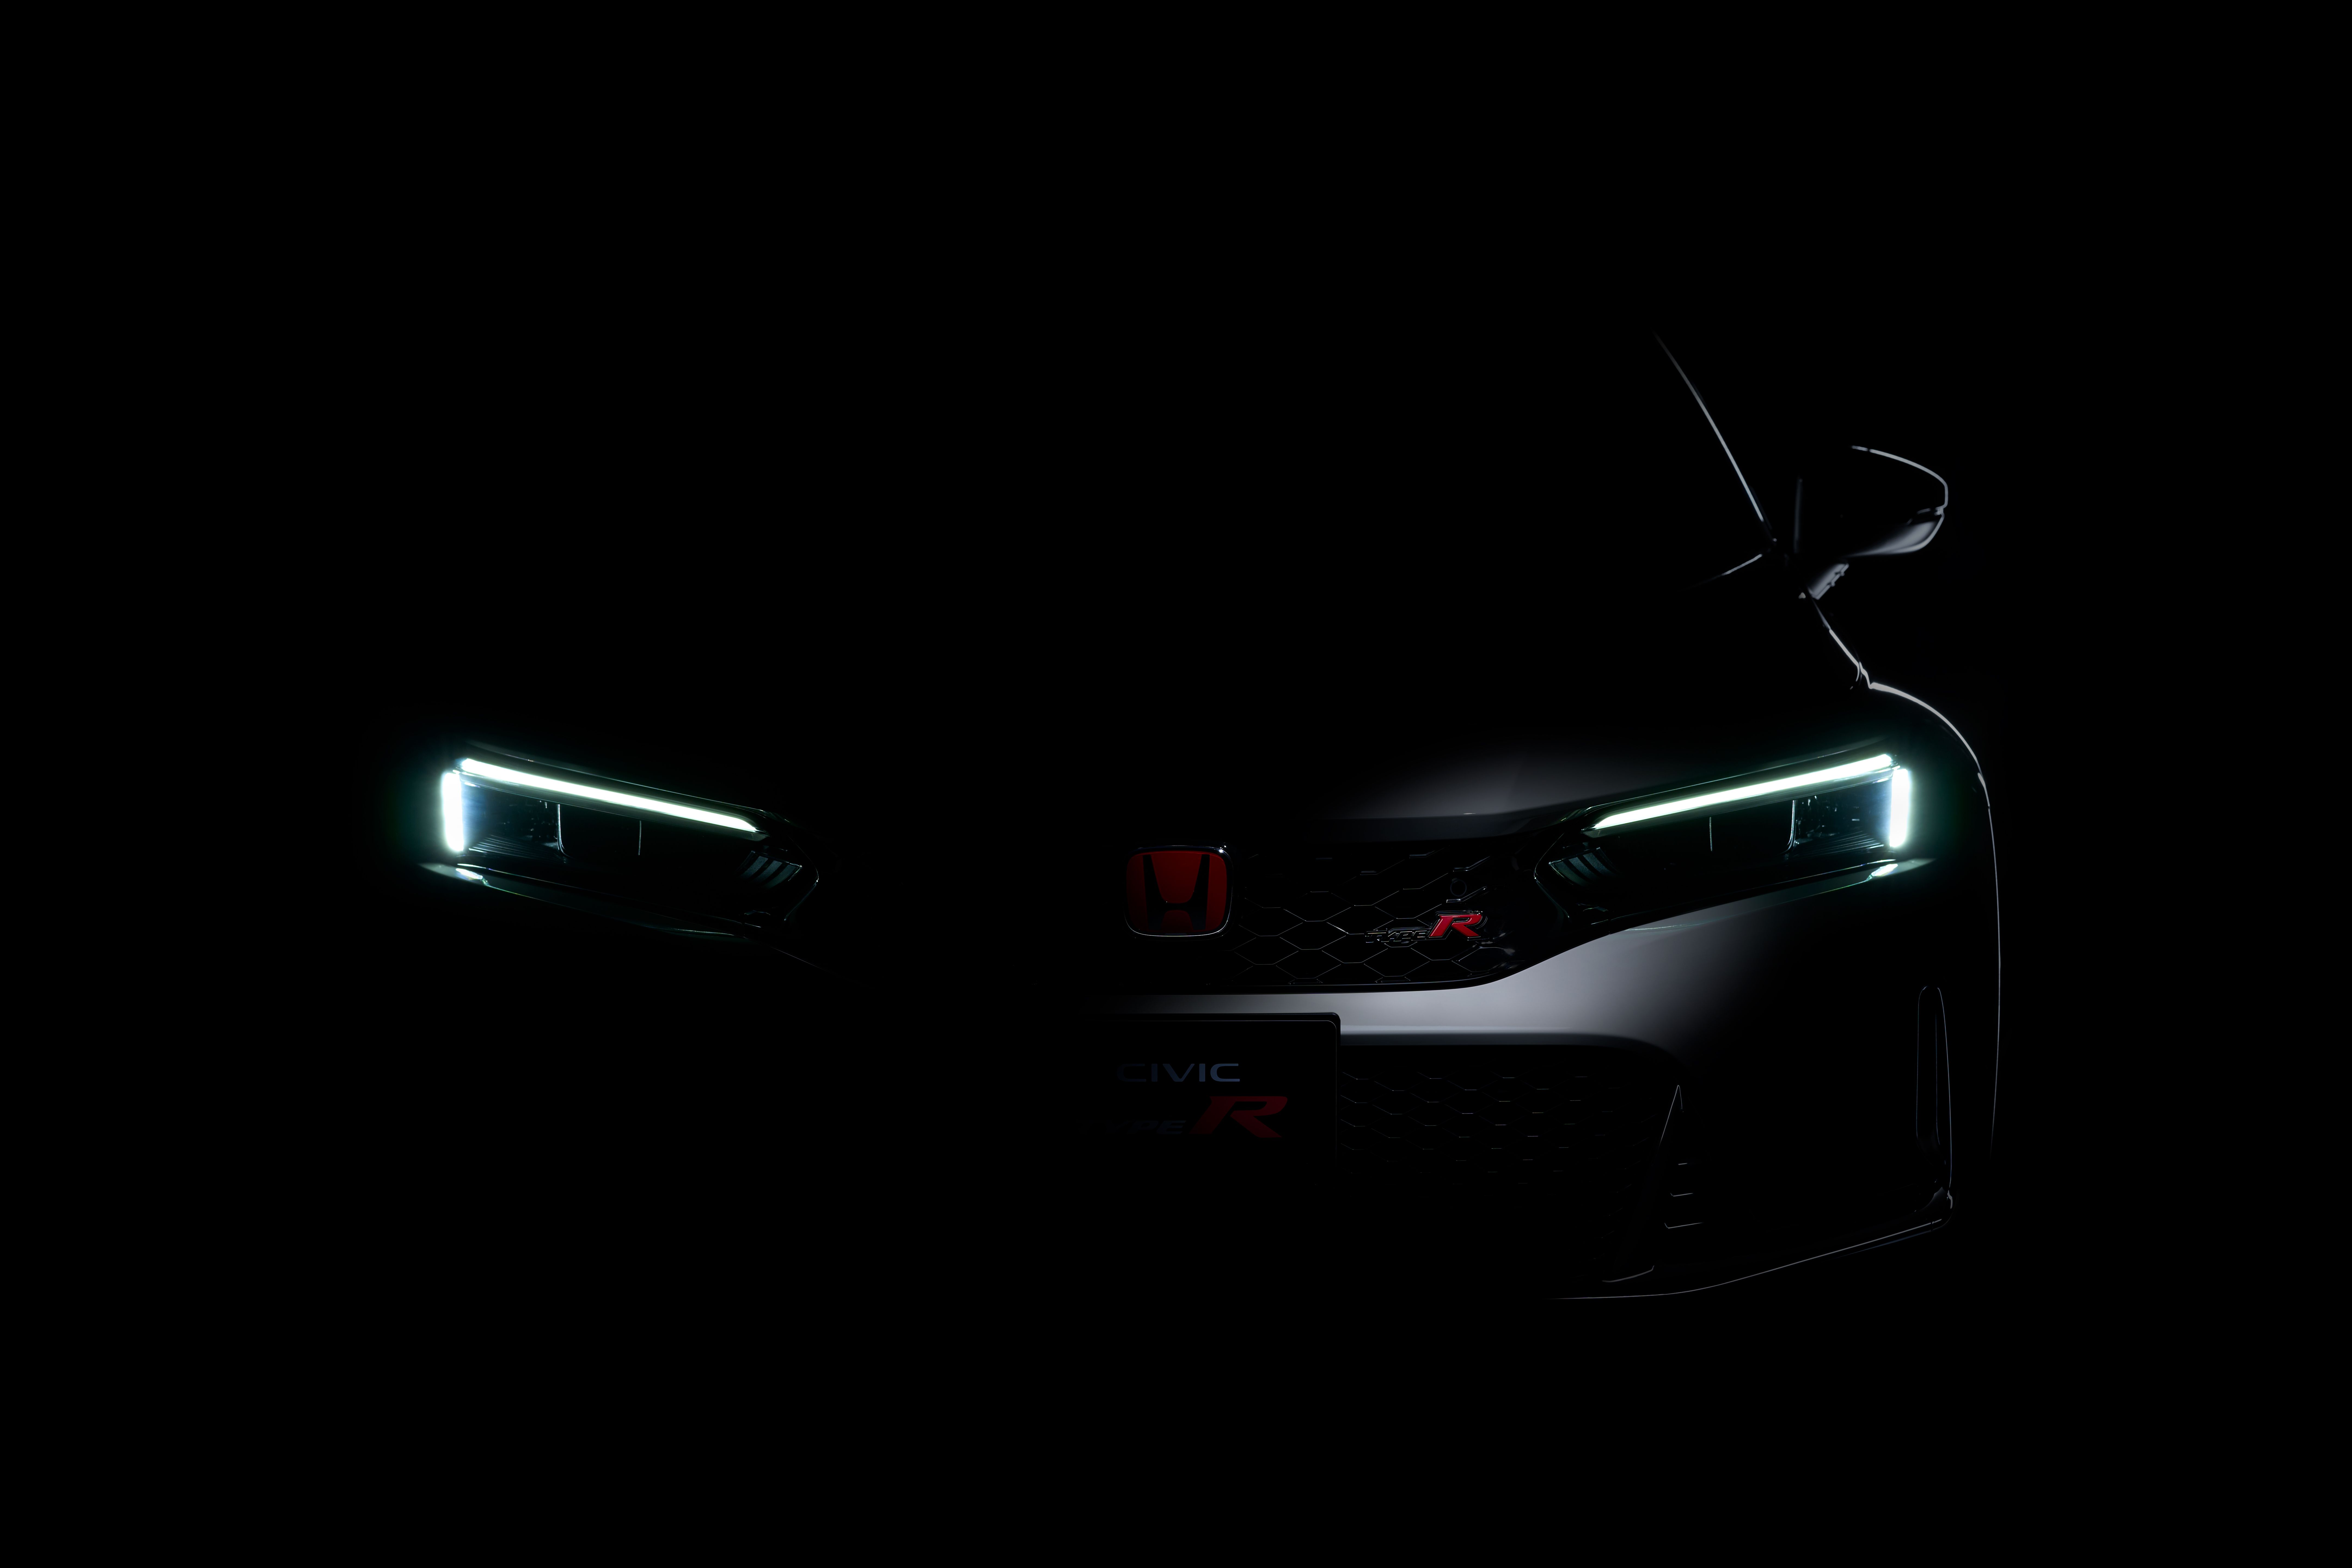 What Do We Know about the All-New 2023 Honda Civic Type R?